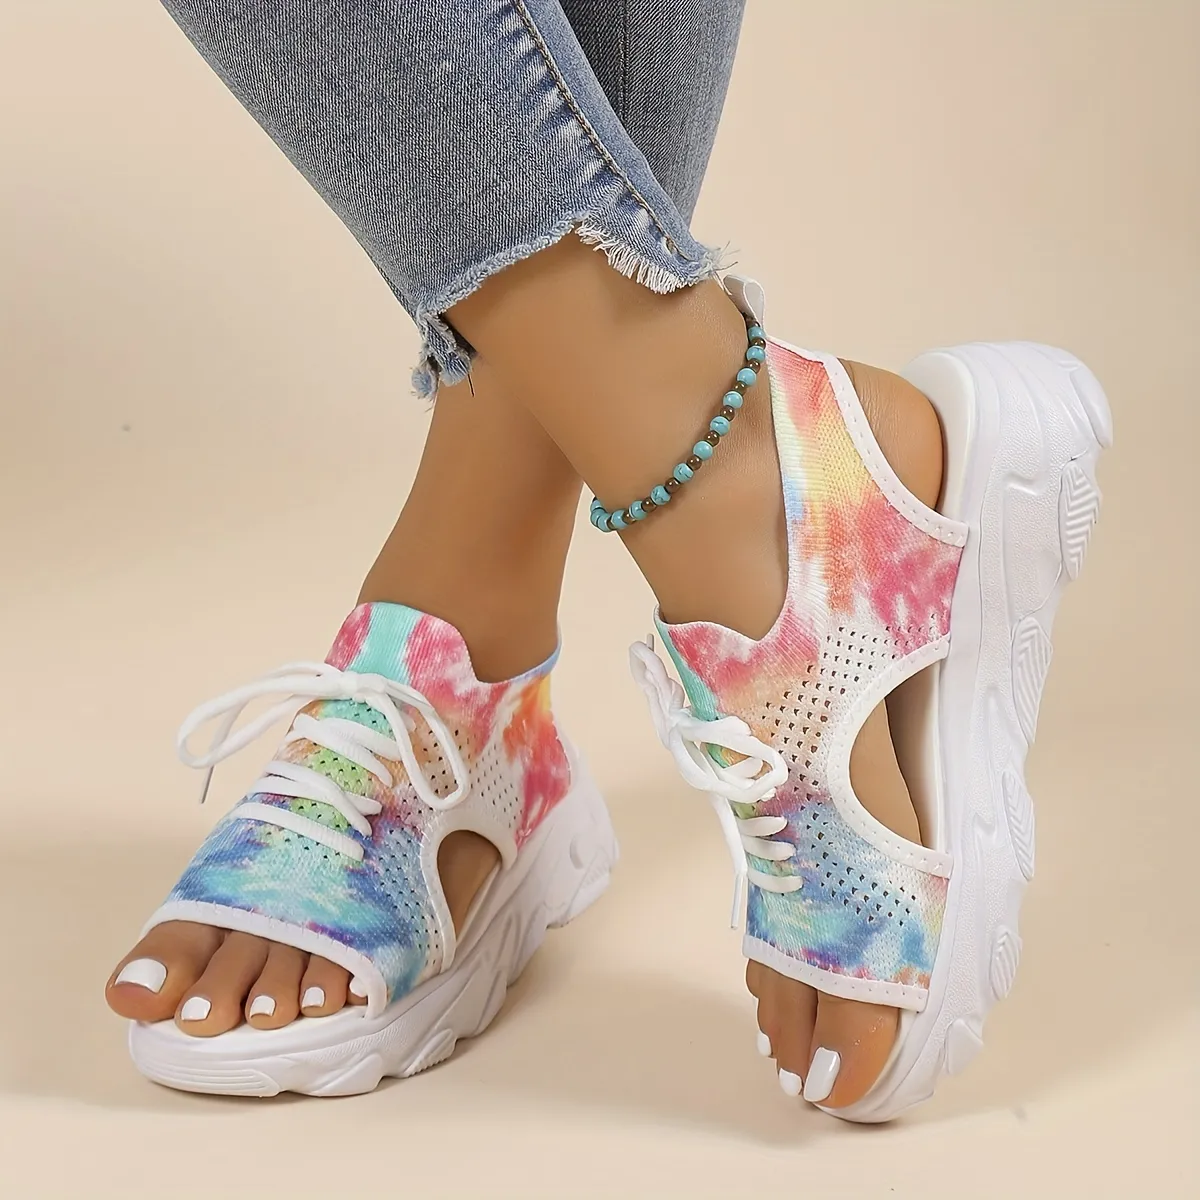 Women's Summer Fashion Sandals, Open Toe Lace-up Front, 51% OFF